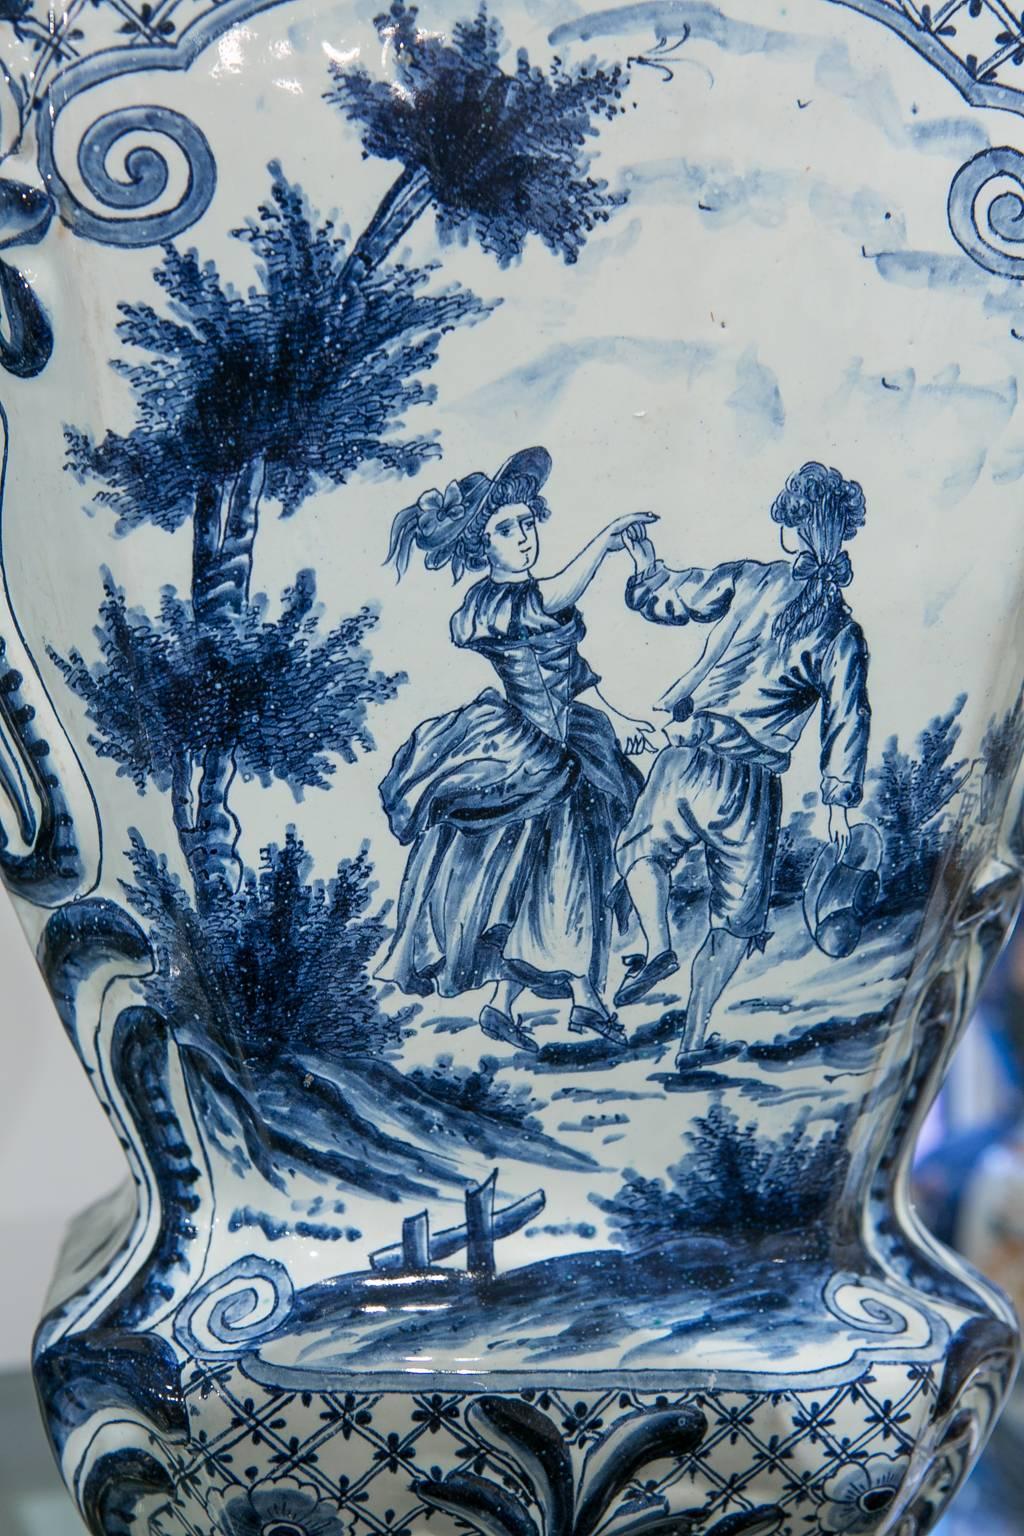 We are pleased to offer this massive blue and white Dutch Delft five-piece garniture with lovely, well painted, romantic scenes showing young couples outdoors. On each vase we see a couple courting or dancing.
One couple is picking apples. They stop